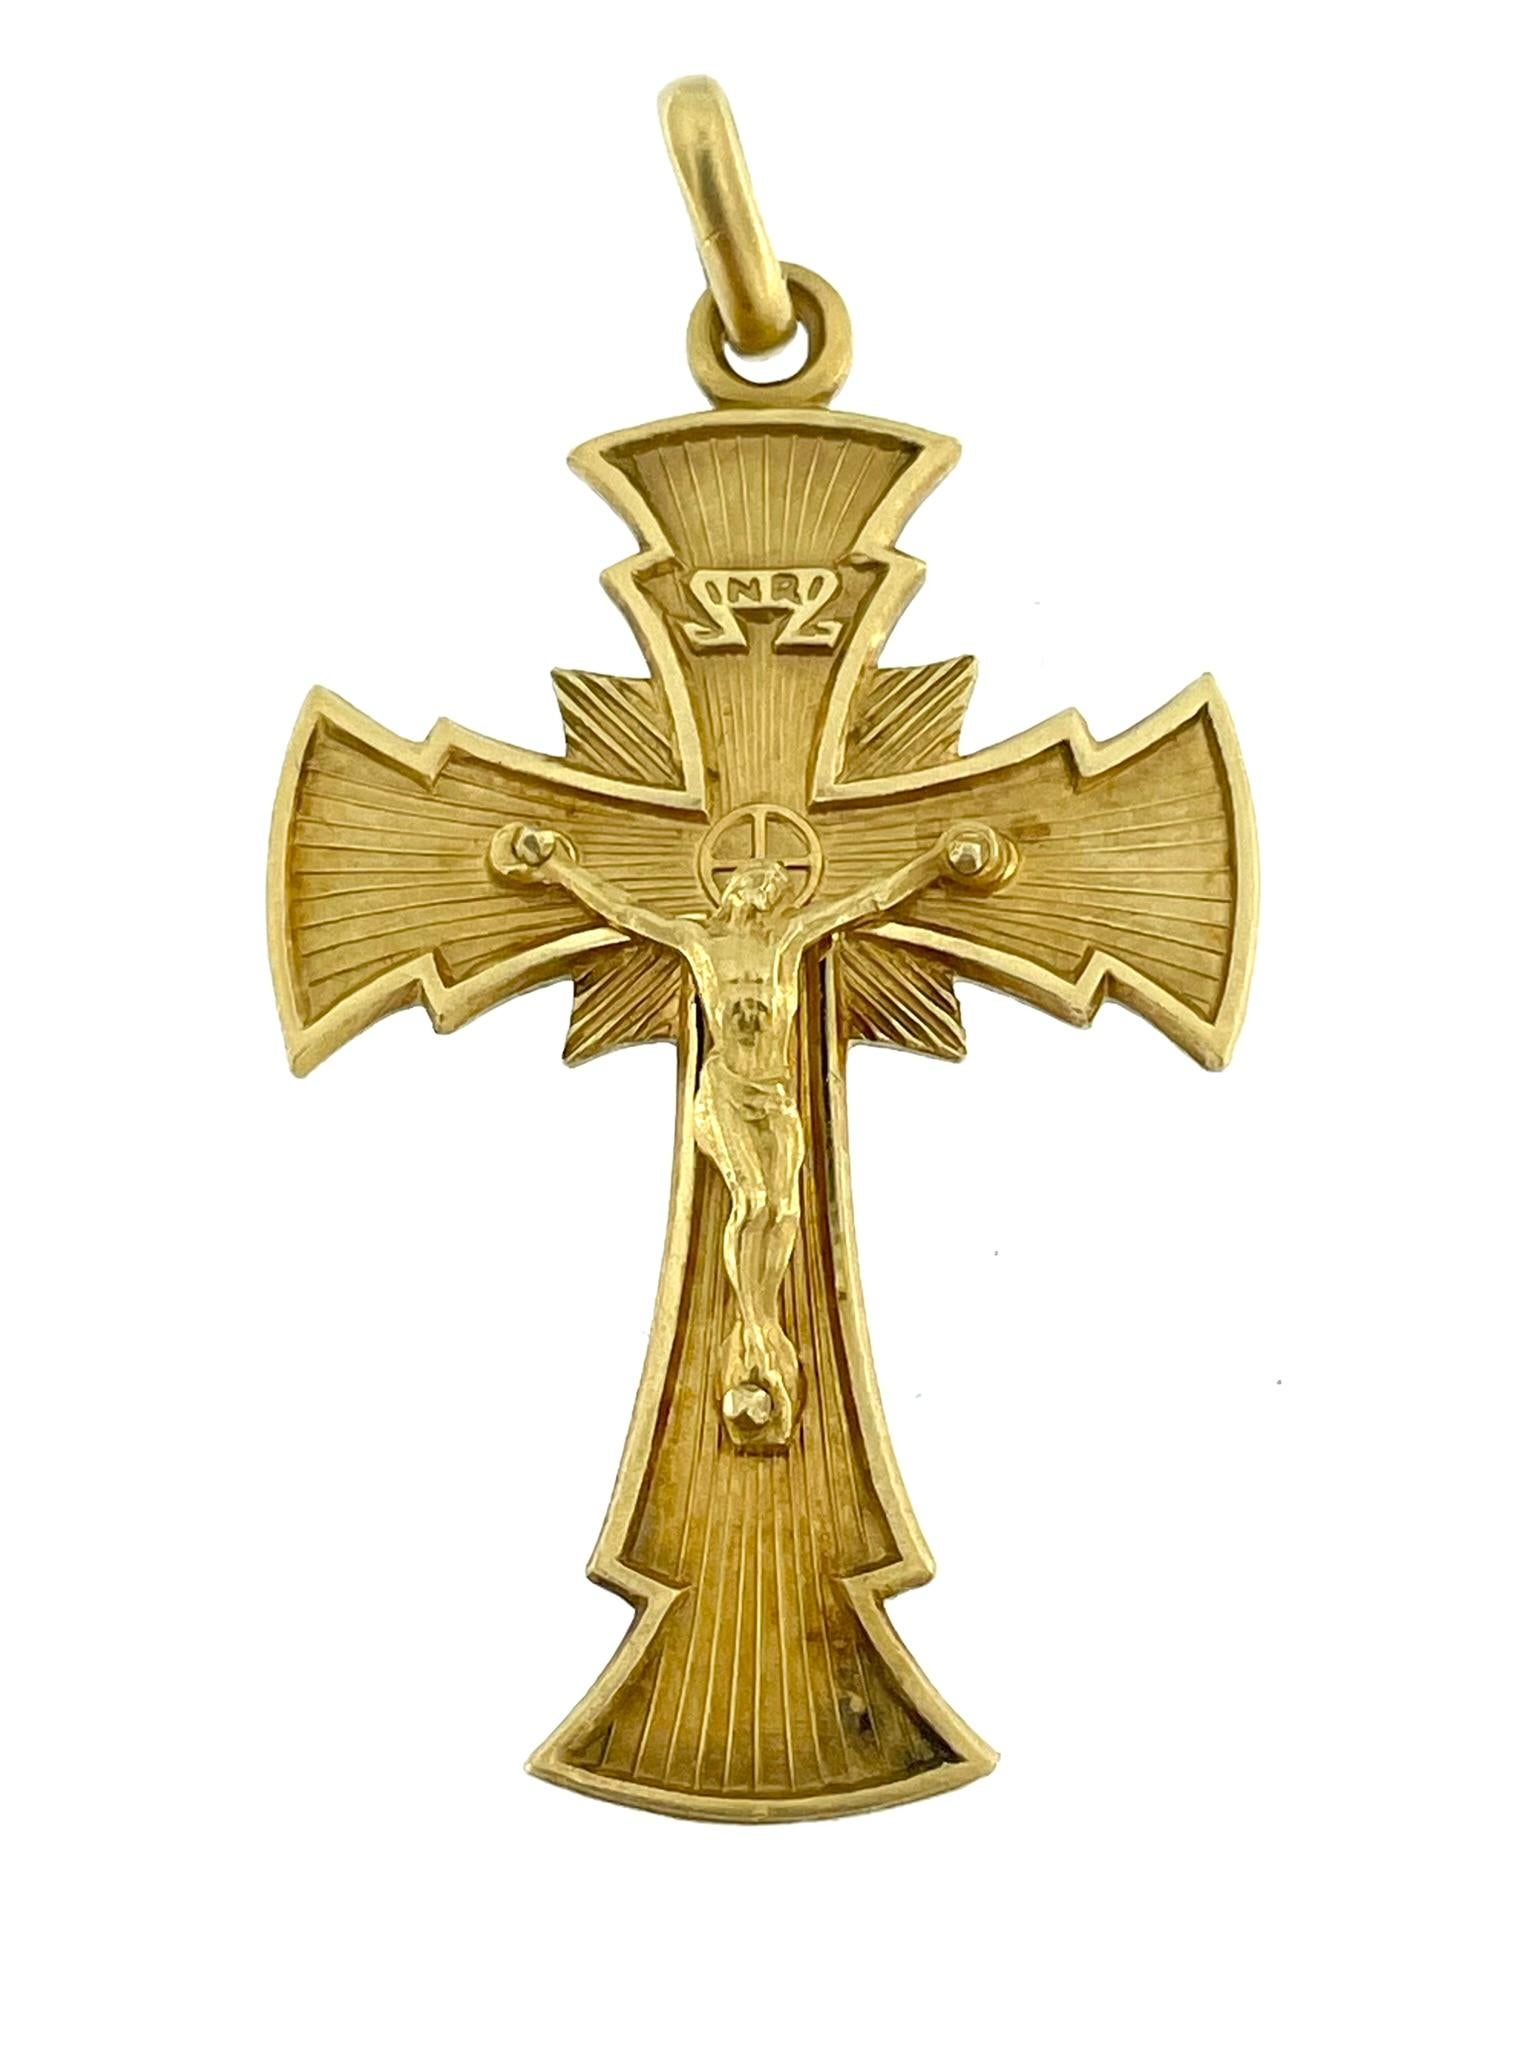 The Hand-Made Italian Crucifix in 18-karat yellow gold is a stunning testament to both craftsmanship and spirituality. The intricate design includes exquisite relief work, elevating it to a level of artistic sophistication. Each detail is carefully